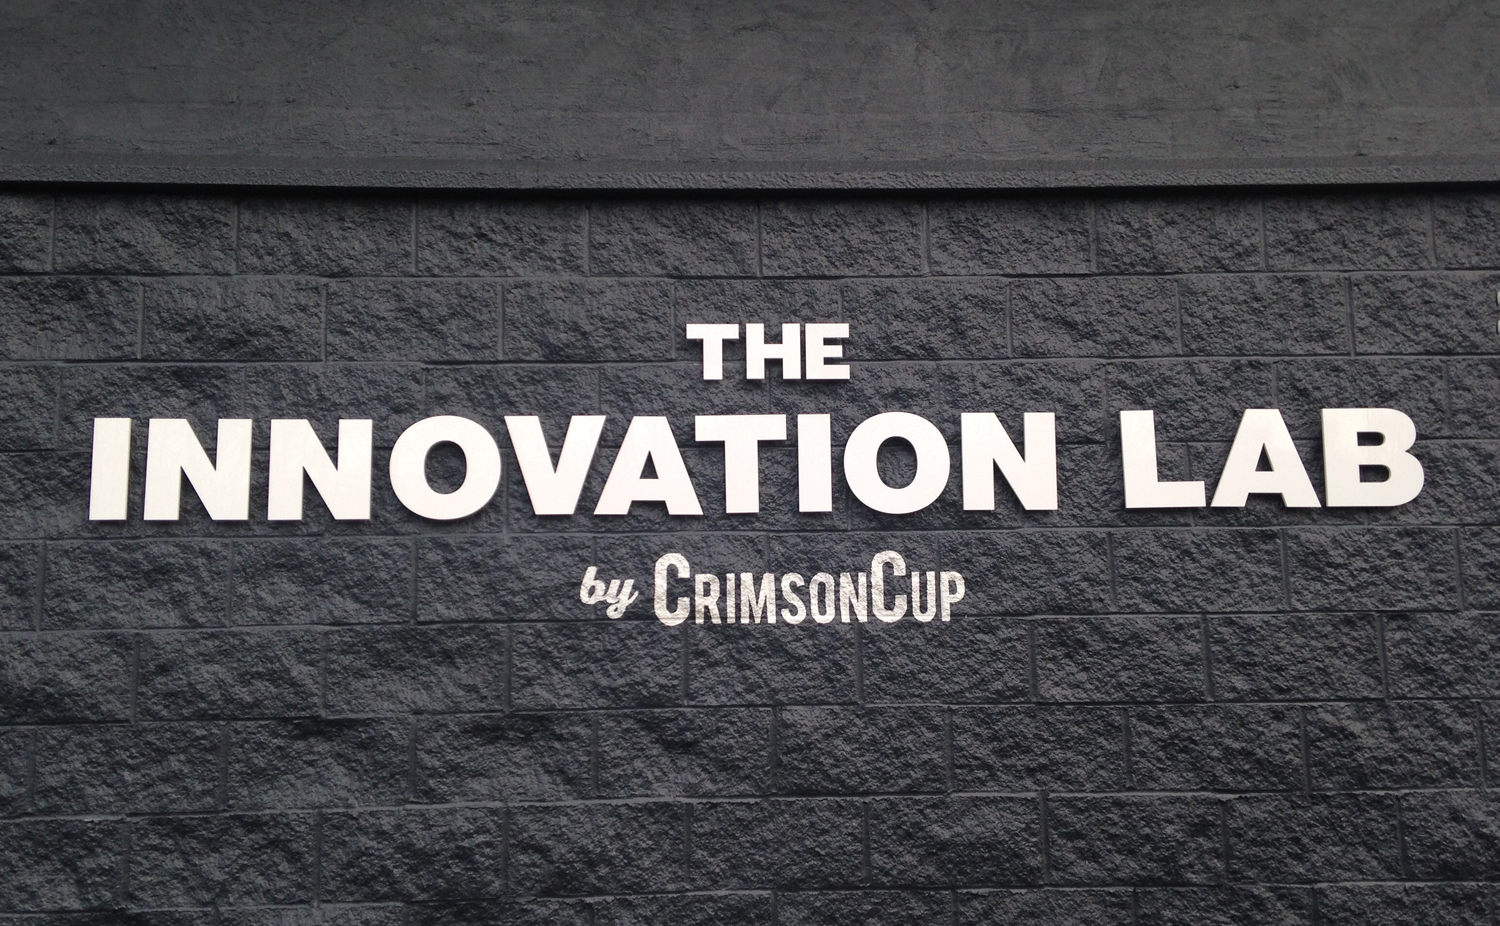 The Crimson Cup Innovation Lab in Columbus, Ohio offers consumer education courses on coffee science, brewing and roasting.